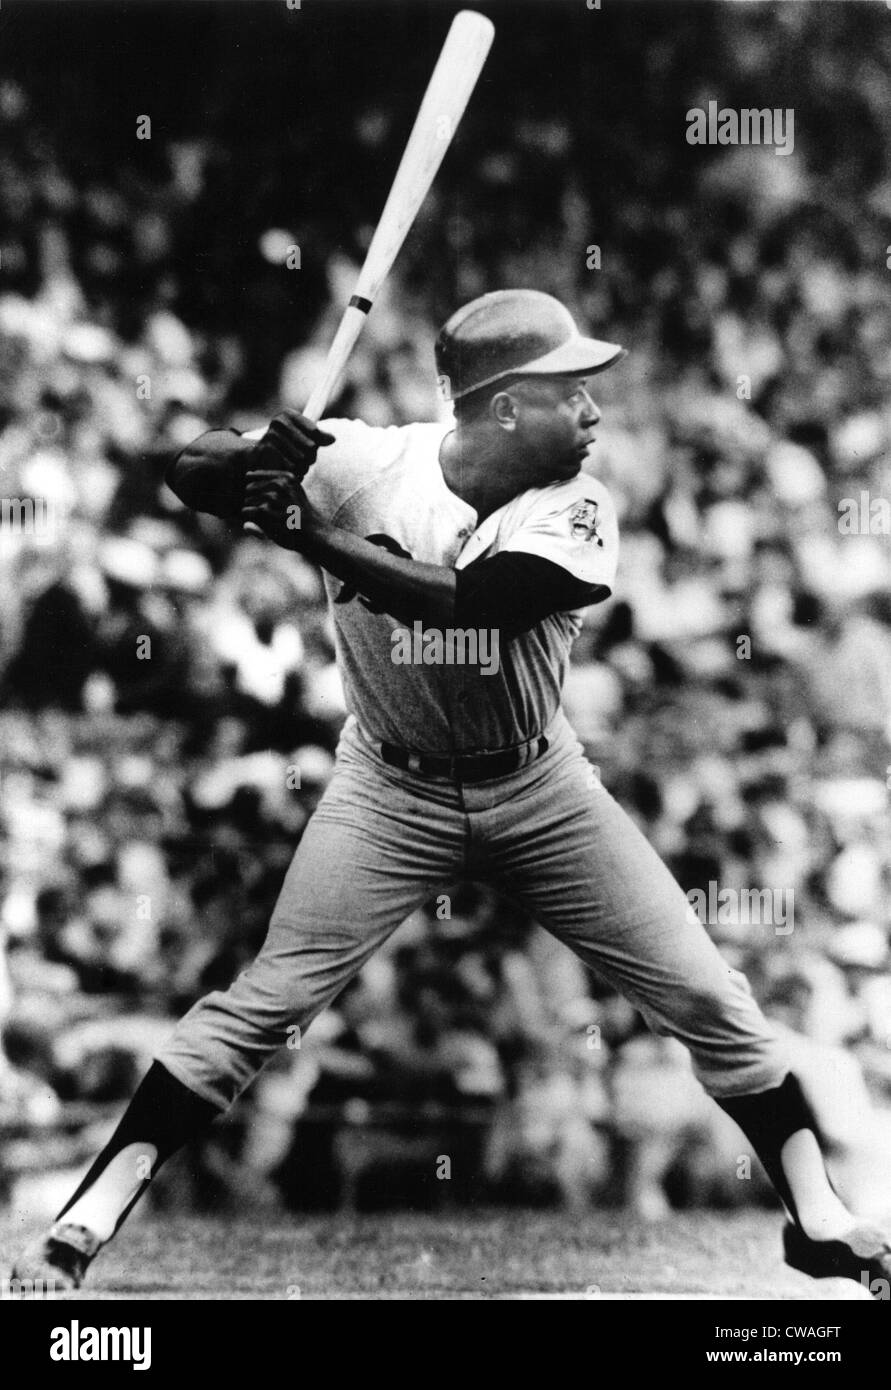 Hank Aaron about to get his 3000th hit in Cincinnati, 1970. Courtesy: CSU Archives / Everett Collection Stock Photo